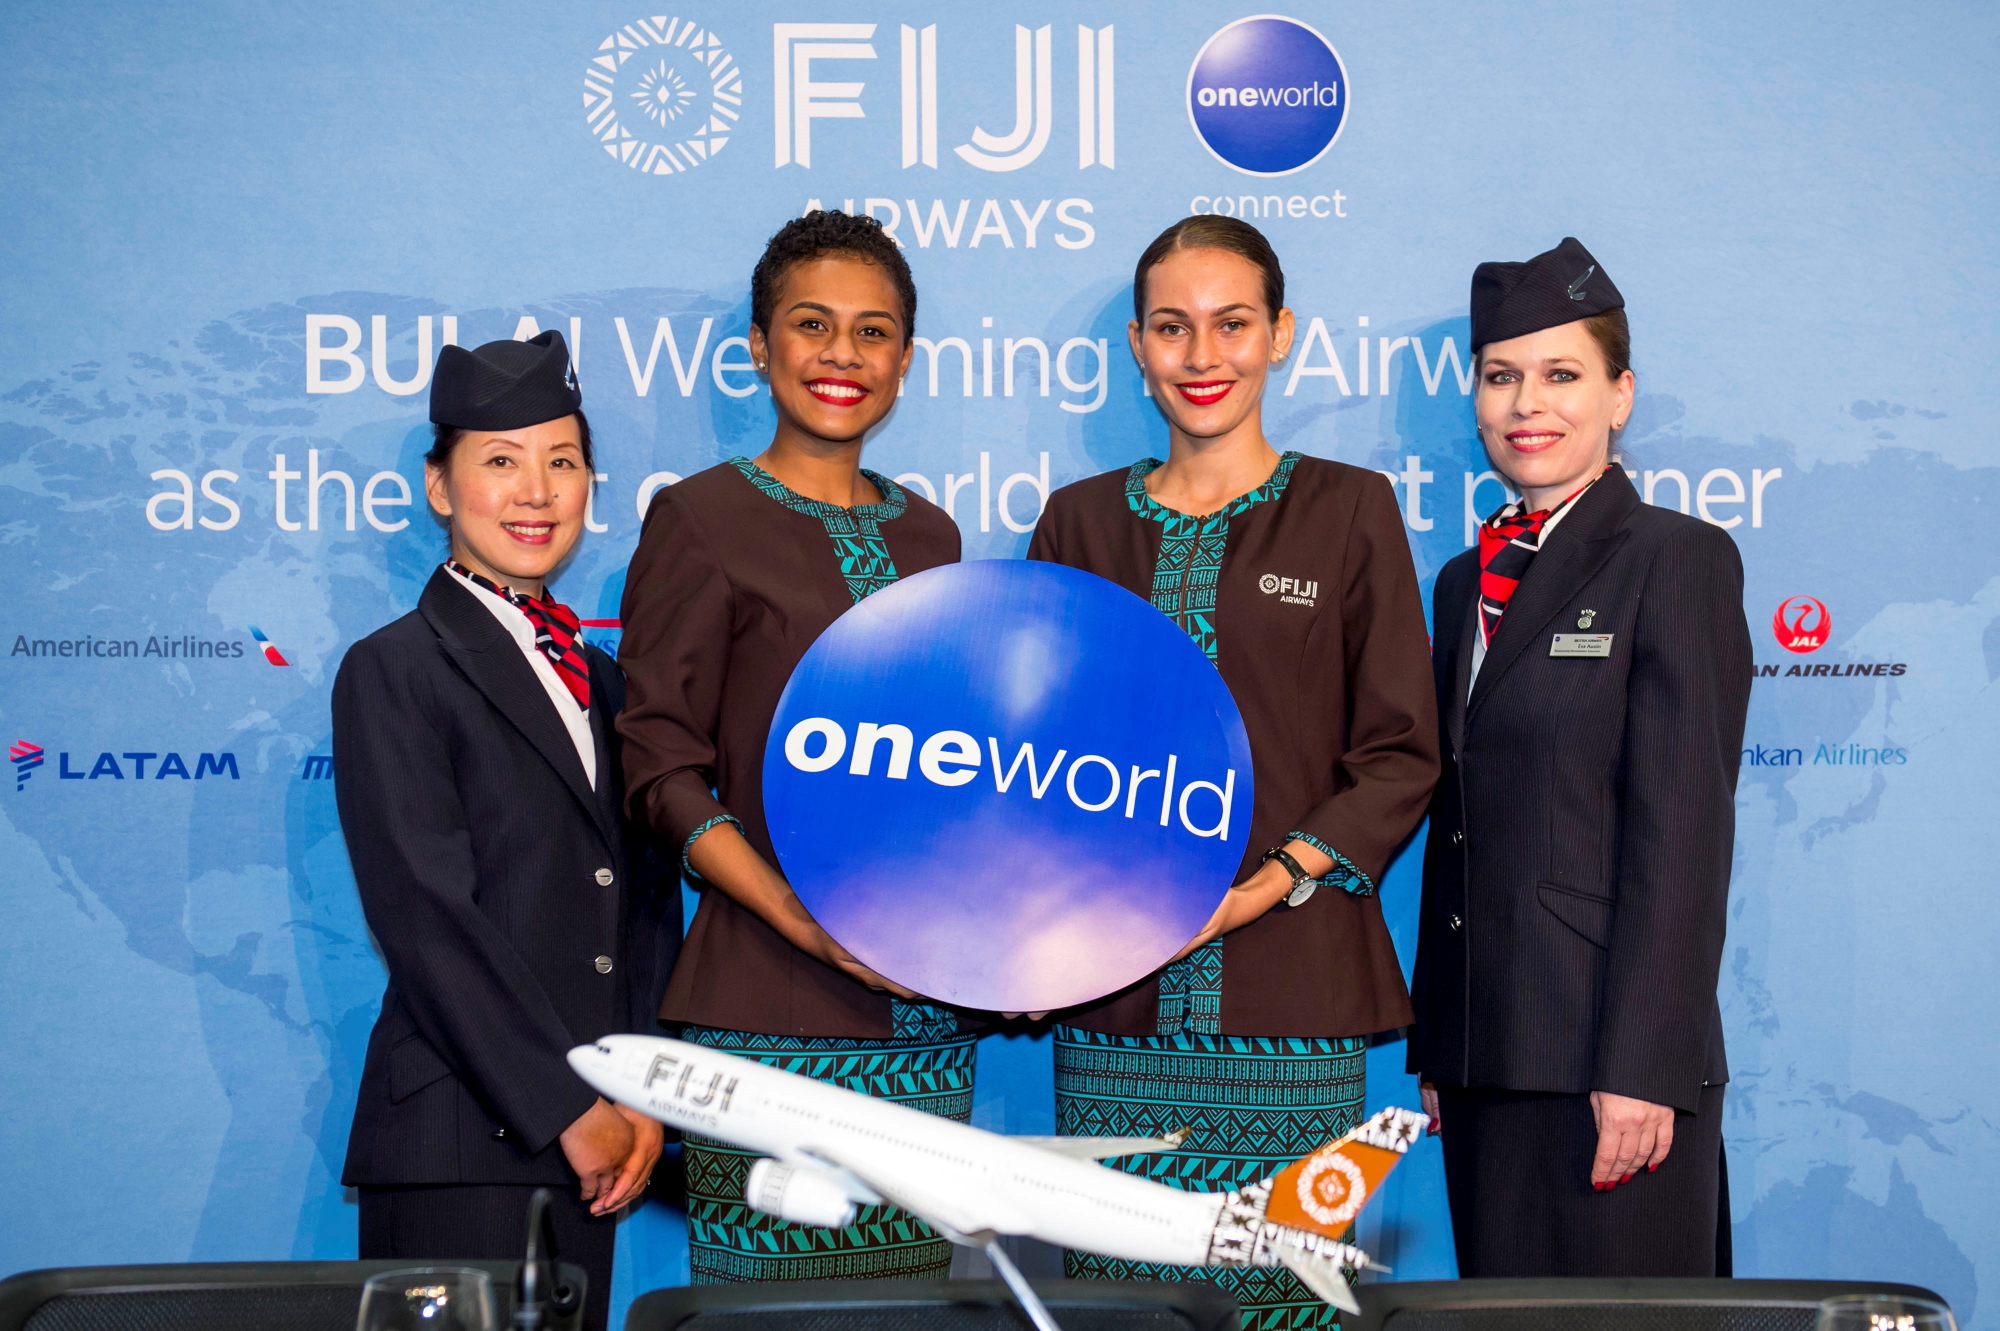 British Airways and Fiji Airways have signed a codeshare agreement. As part of the agreement, British Airways is now selling flights between Singapore, Los Angeles and San Francisco and the Fijian gateway of Nadi. Click to enlarge.